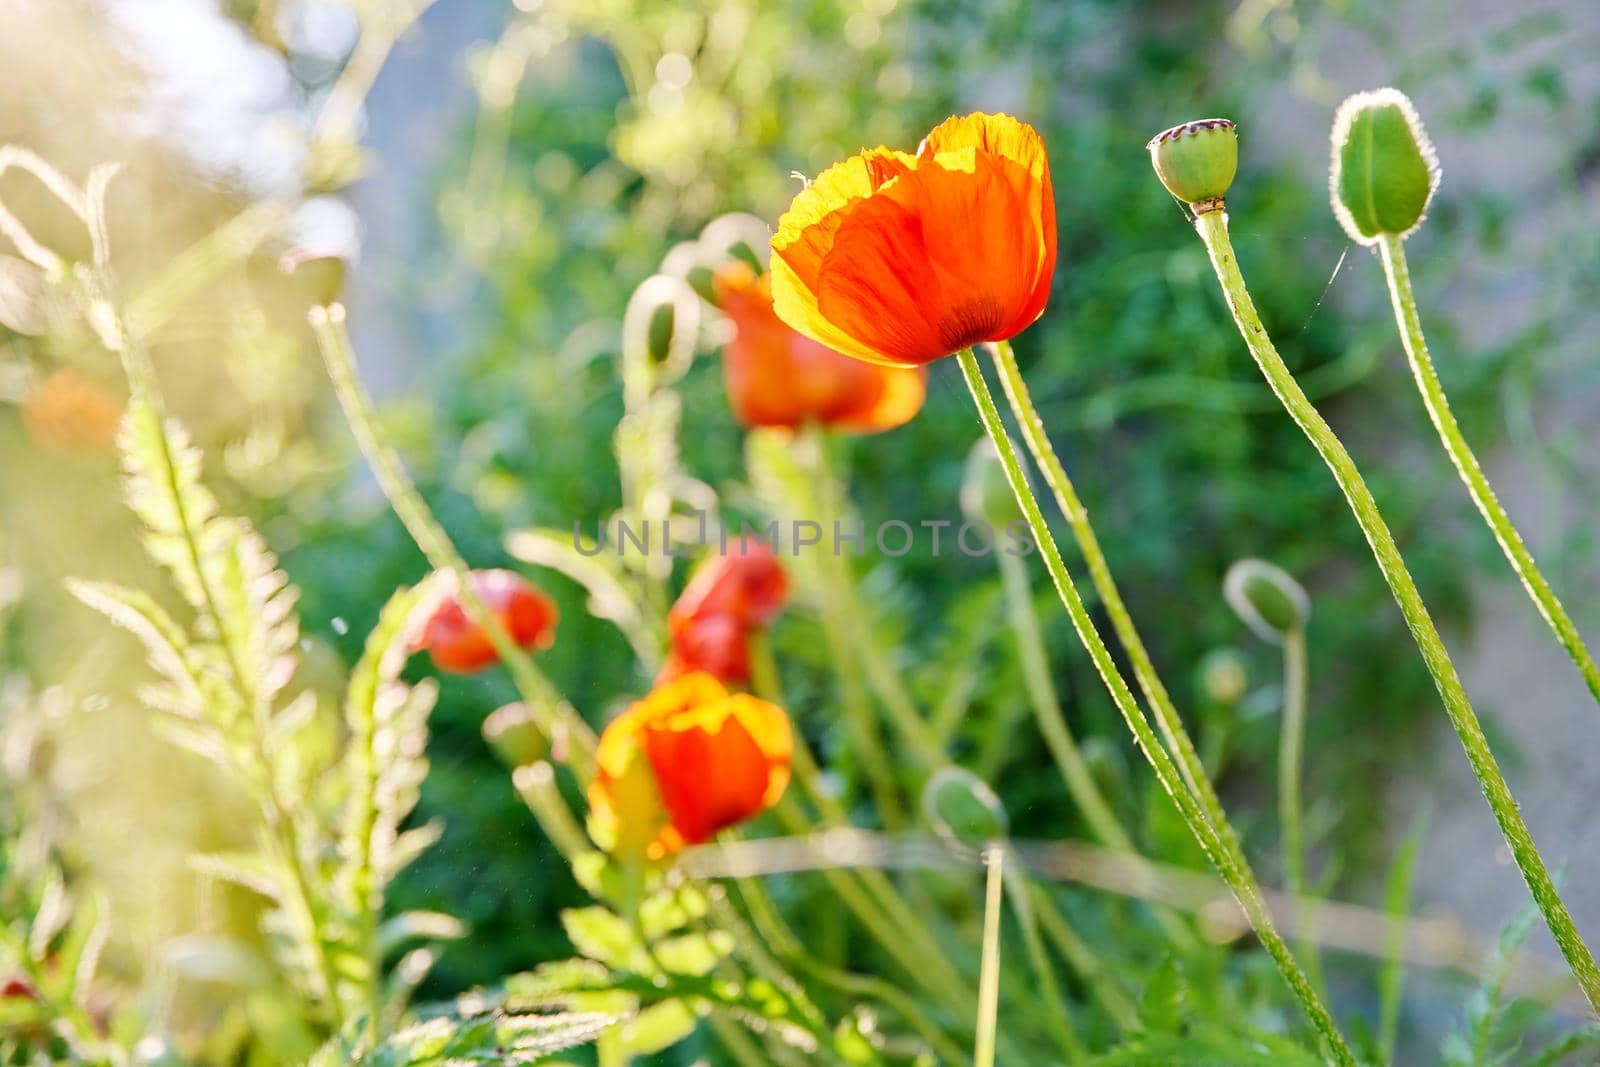 Large decorative red poppies blooming in a flower bed, in yellow sunset light. Spring, summer, beauty of nature concept